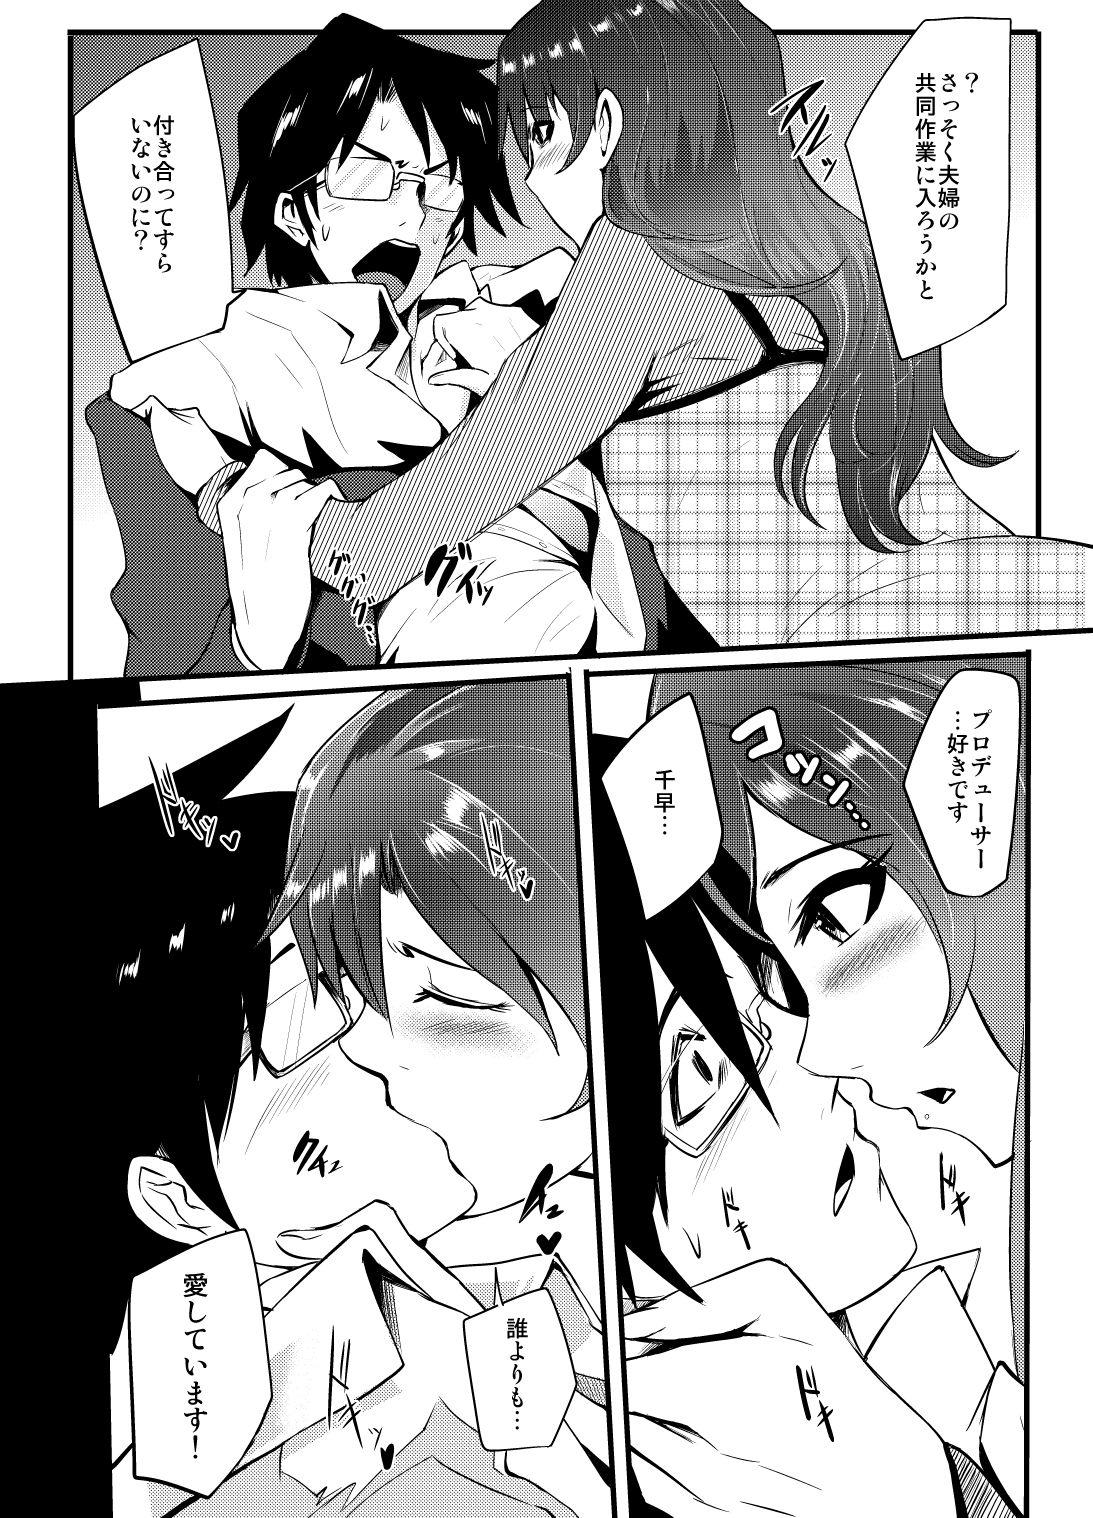 Asian THEYANDEREM@STER - The idolmaster Gaystraight - Page 7